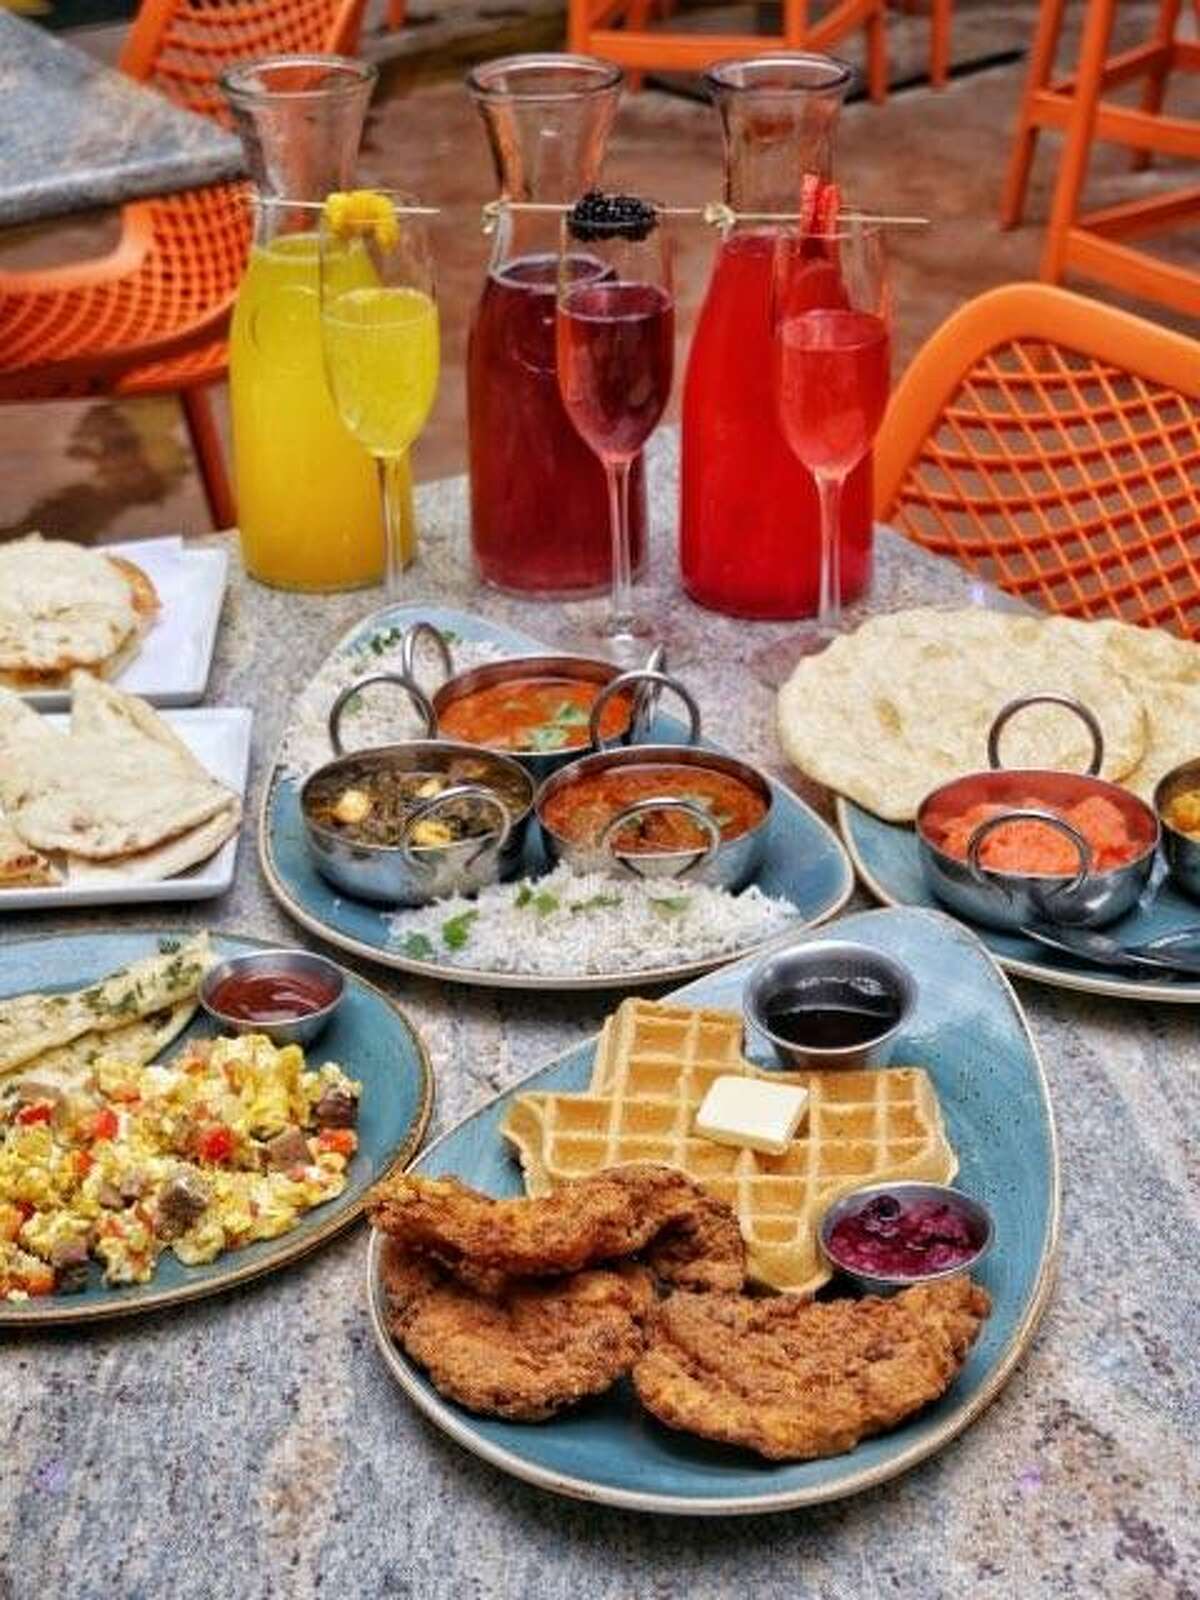 An assortment of brunch foods available at Cowboys & Indians, a fusion restaurant in Houston's Heights.